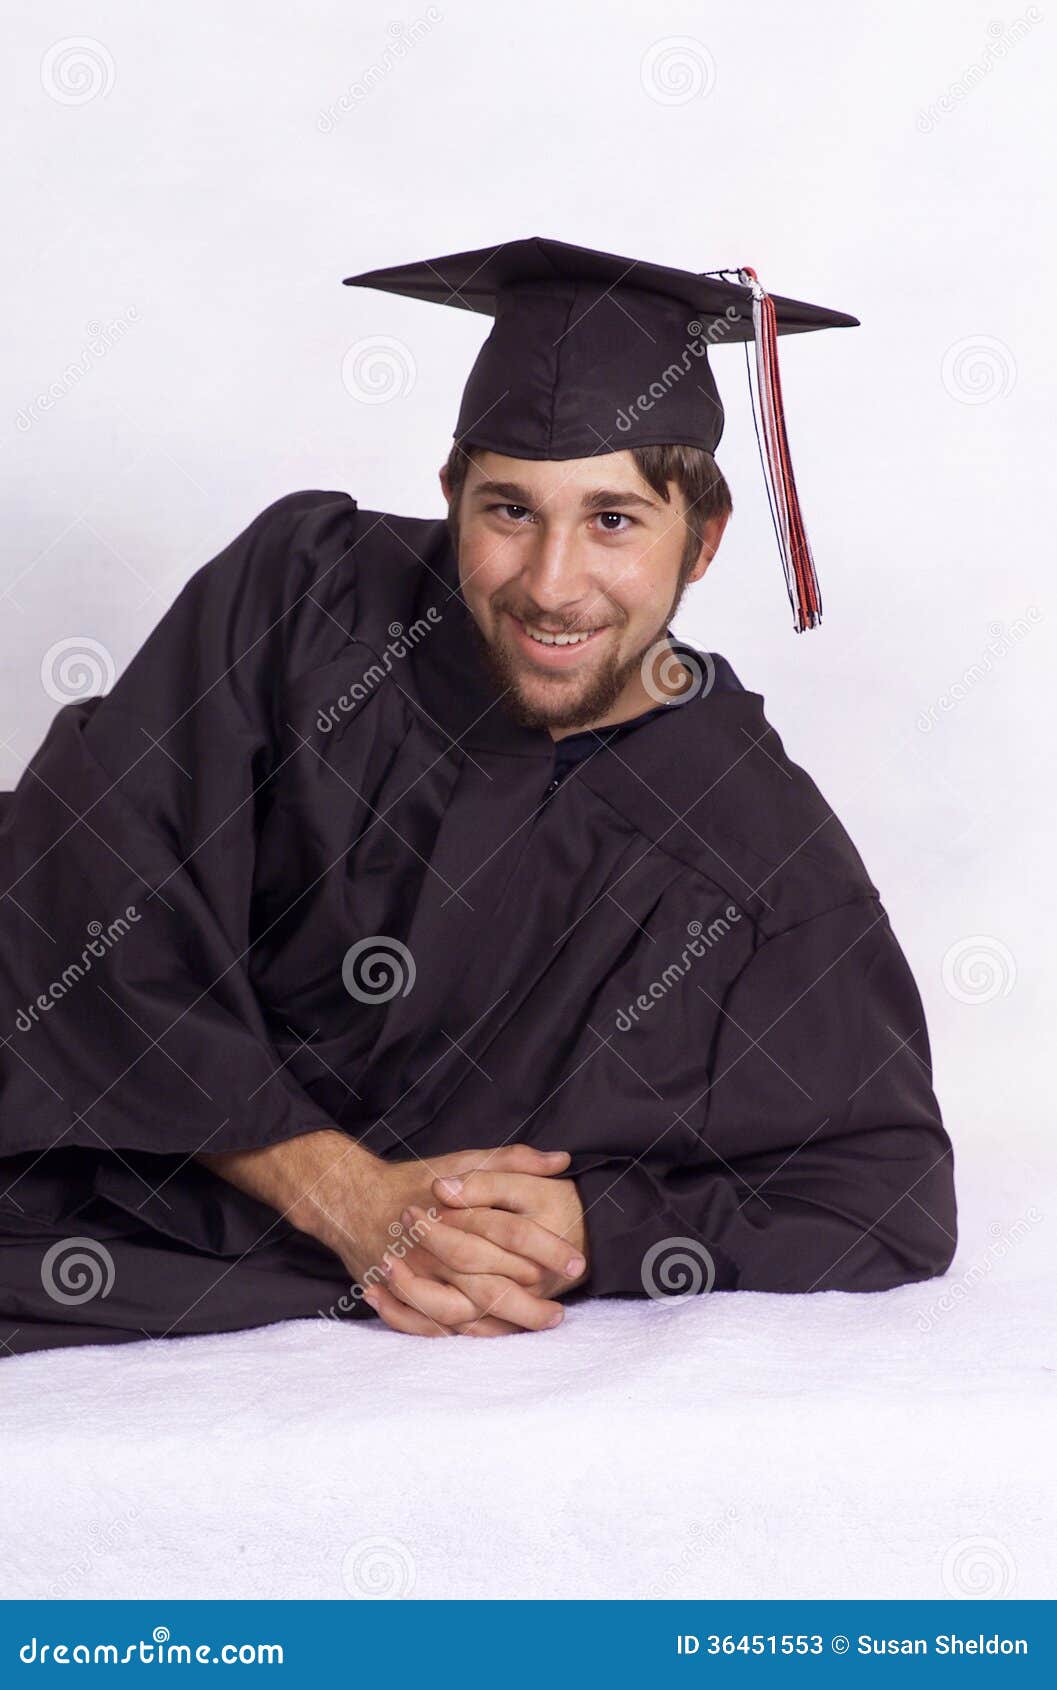 A Group of Person Holding Graduation Cap · Free Stock Photo